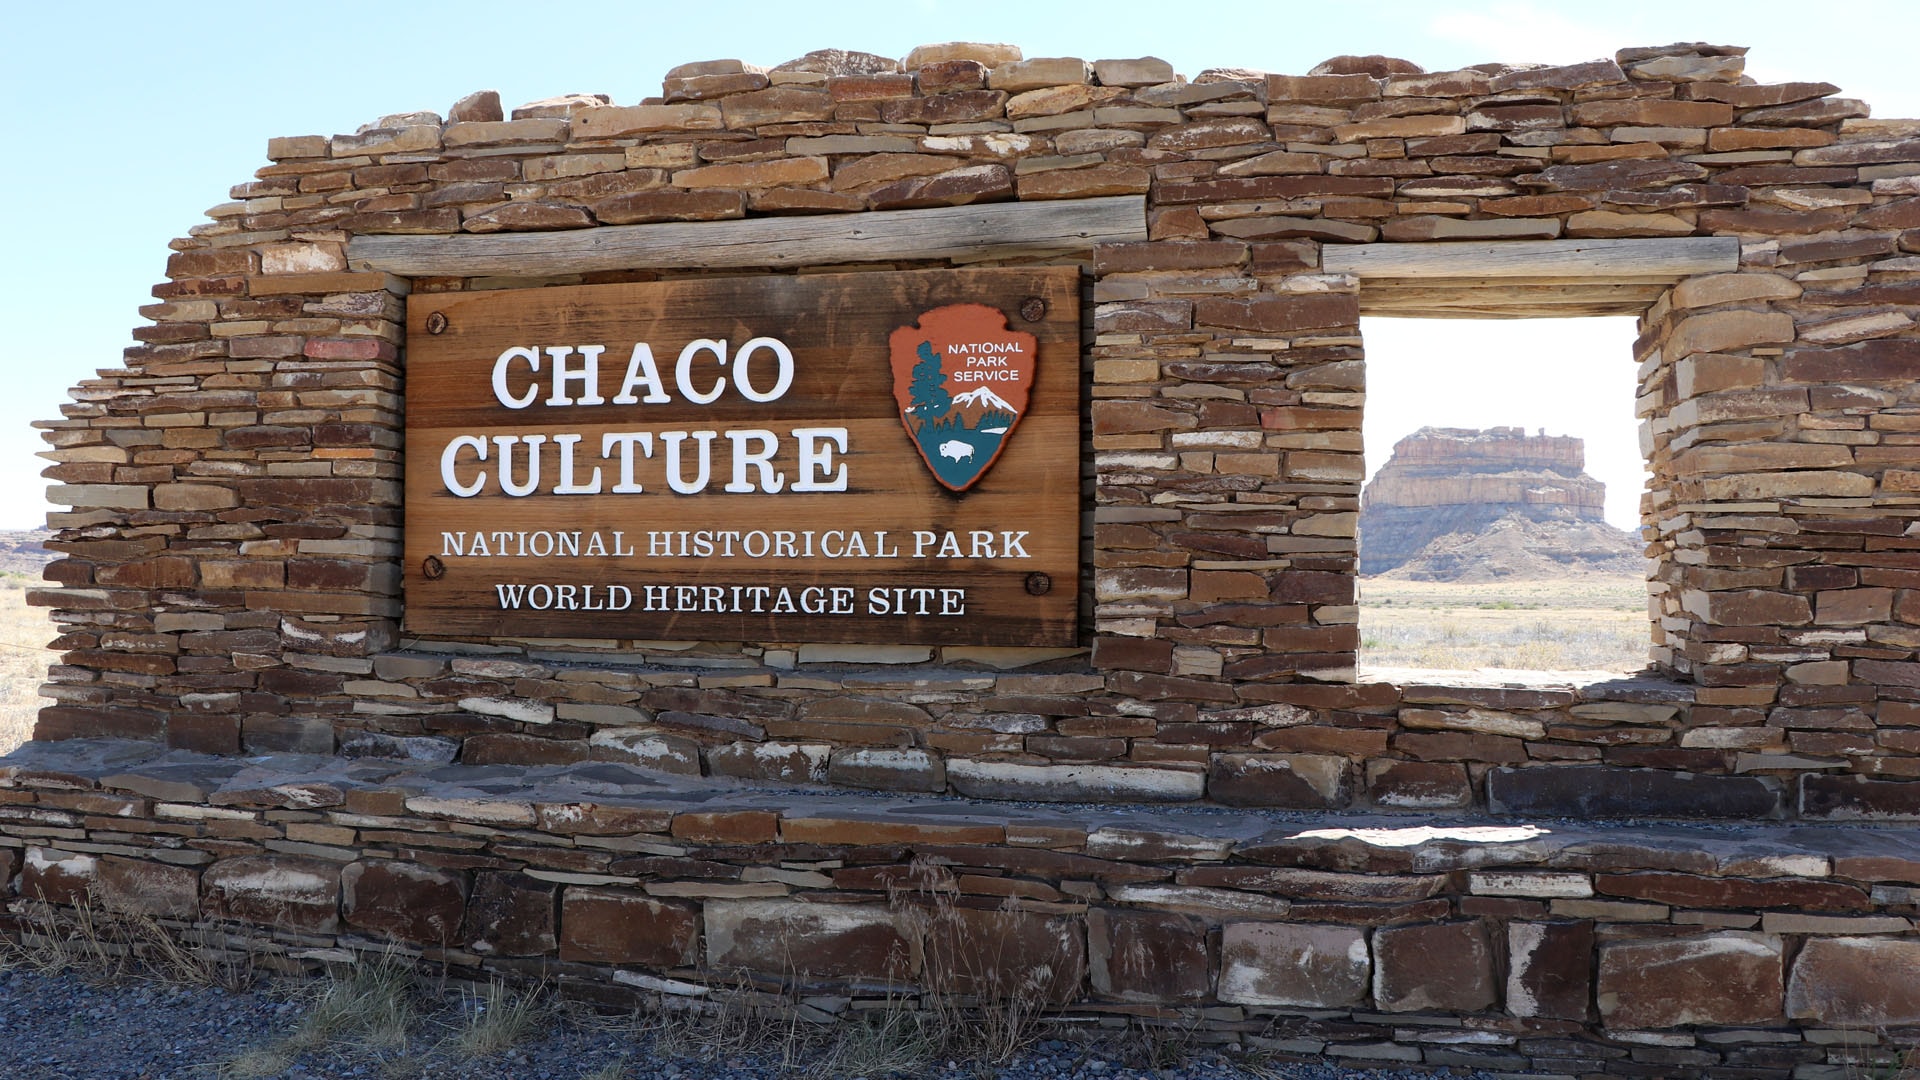 The Chaco Canyon National Historical Park is in a remote area of northwest New Mexico.